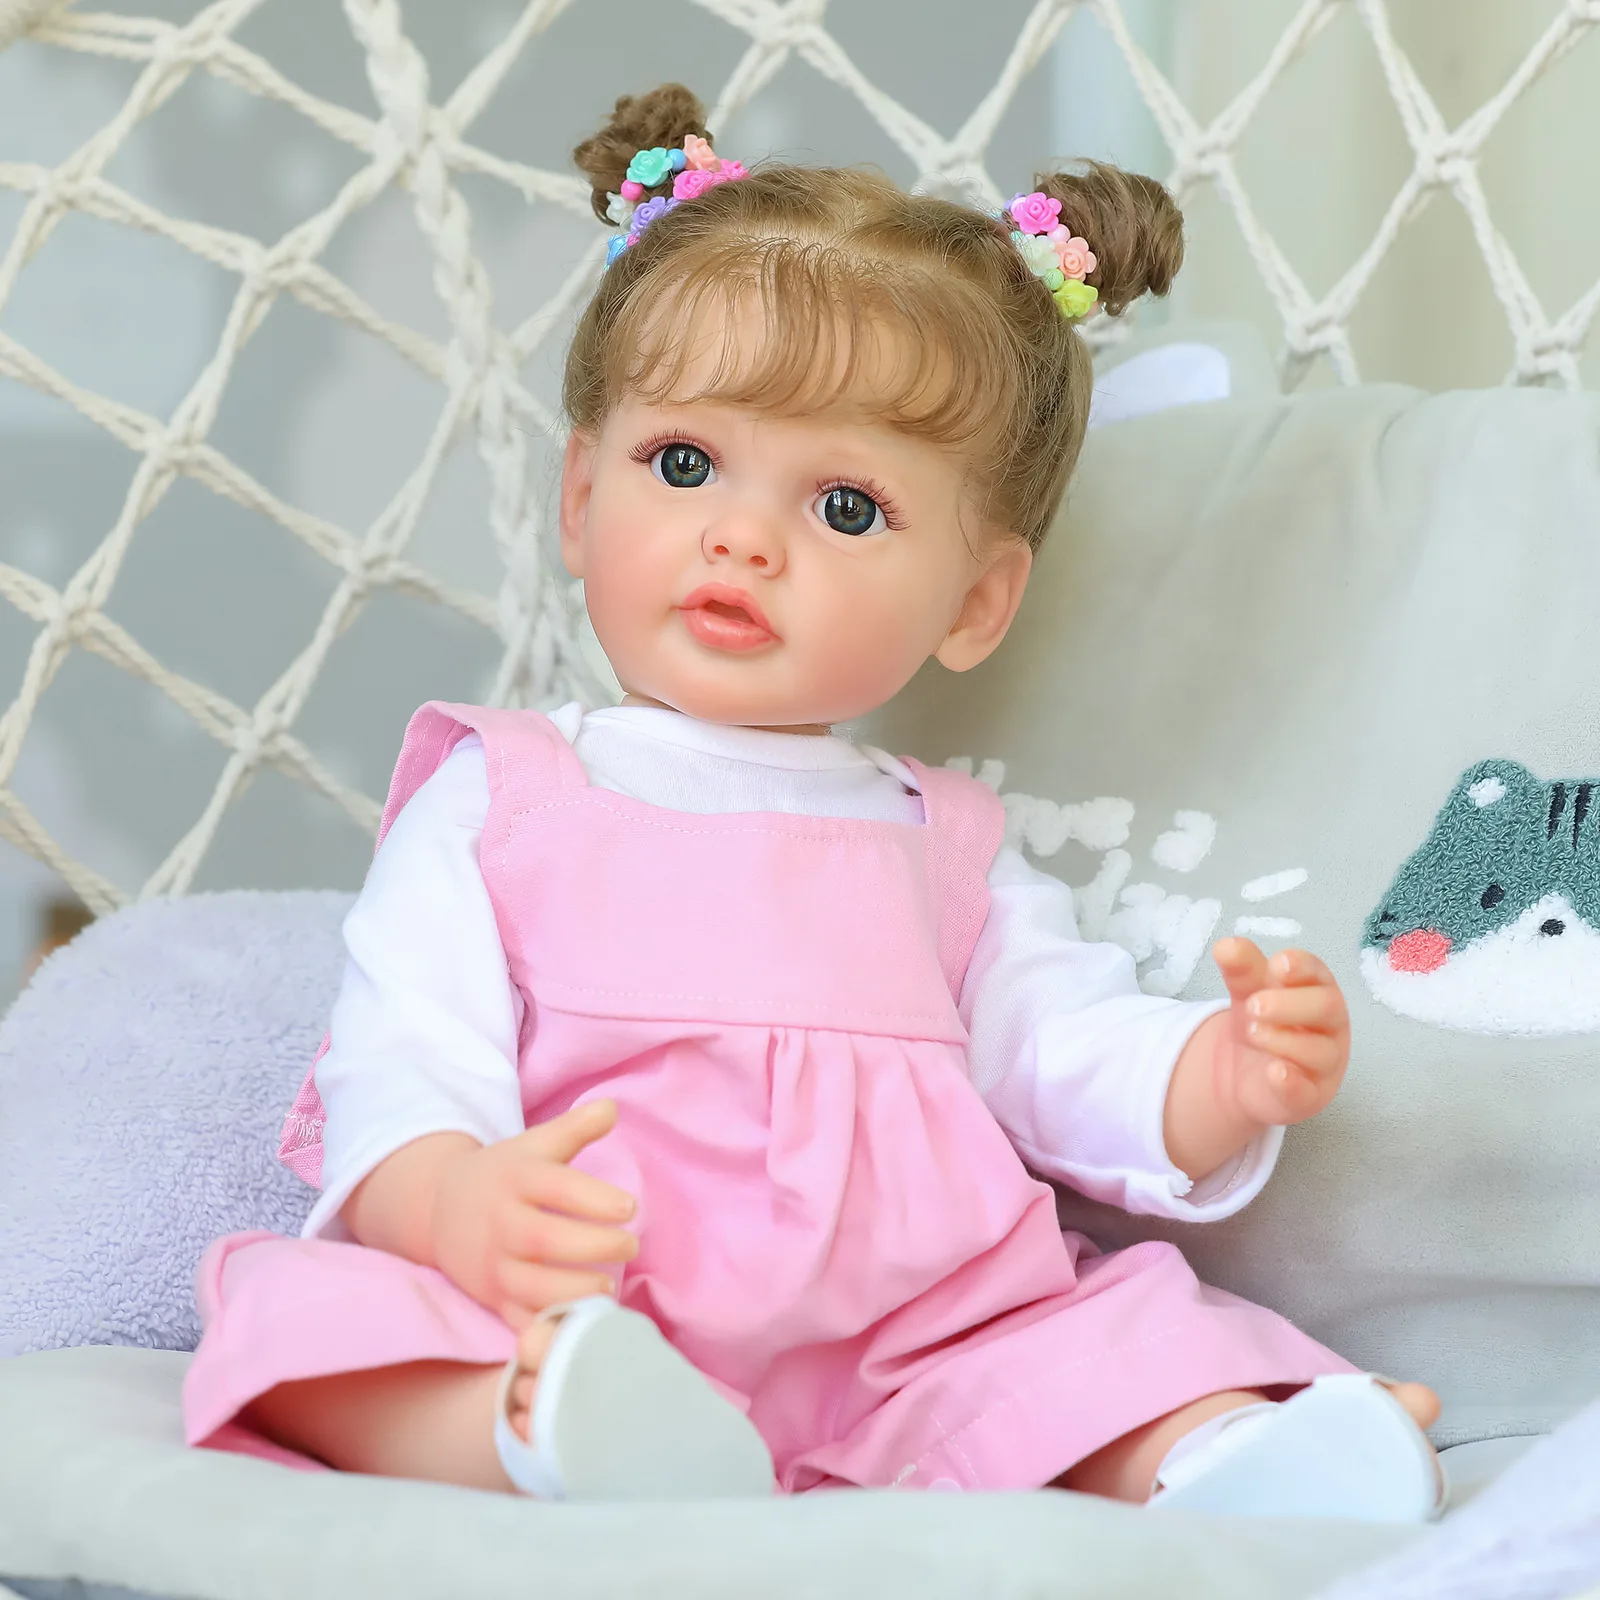 Finished Bebe Reborn Doll 55CM Reborn Baby Full Body Soft Silicone Real Touch Doll Hand Painted 3D Skin Rooted Hair Gifts Child 60cm reborn doll dress up princess june awake bebe baby realistic newborn soft body vinyl silicone surprice gift toy for child